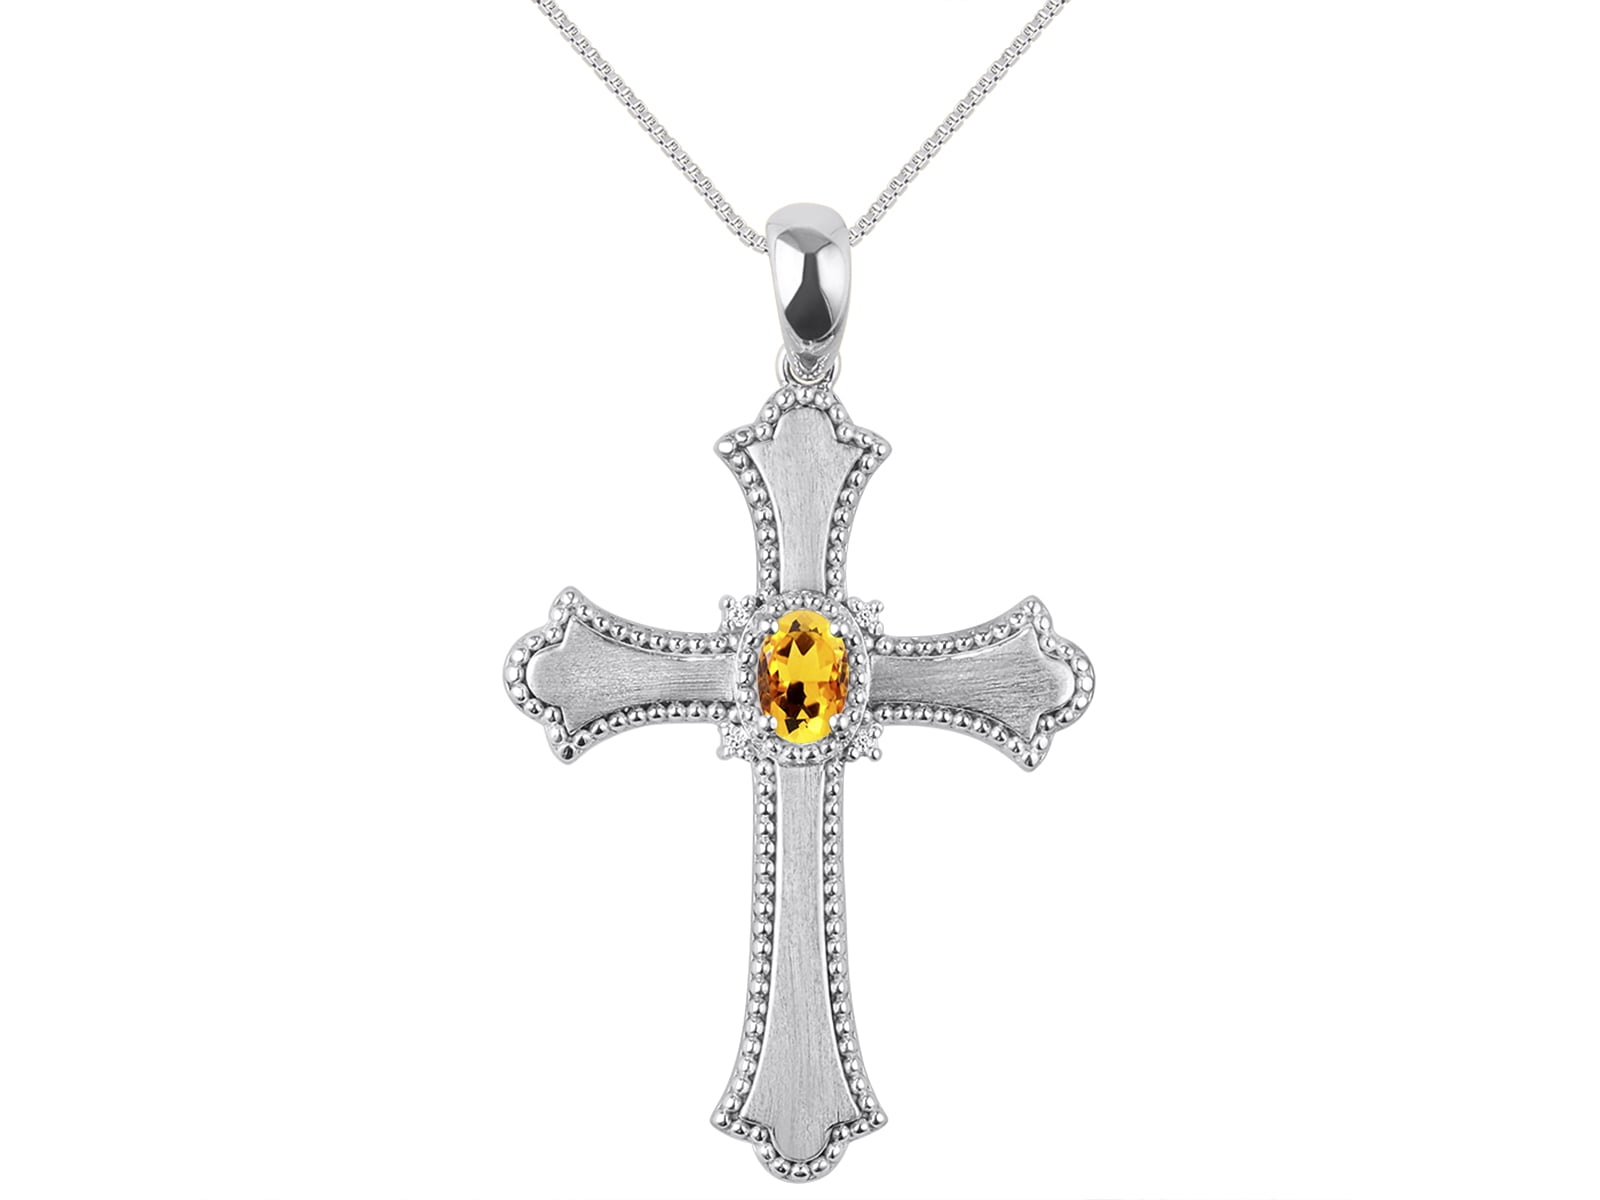 Details about   Diamond & Emerald Cross Pendant Necklace Set In Set in Sterling Silver With 18" 